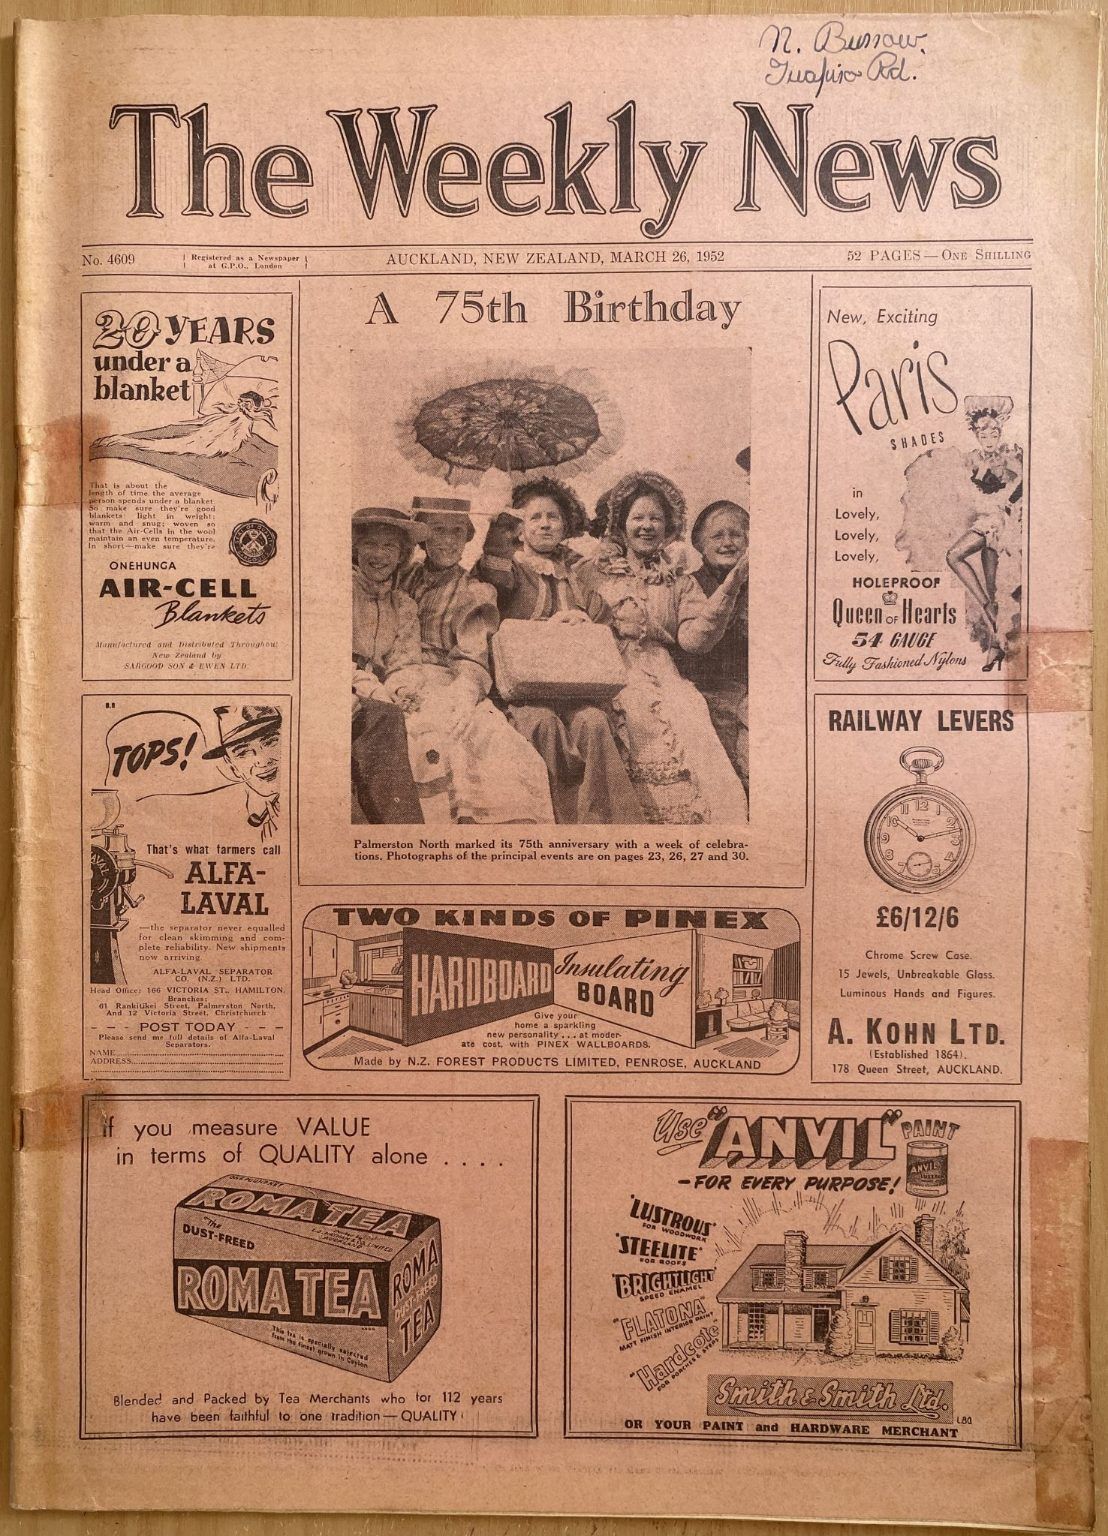 OLD NEWSPAPER: The Weekly News - No. 4609, 26 March 1952